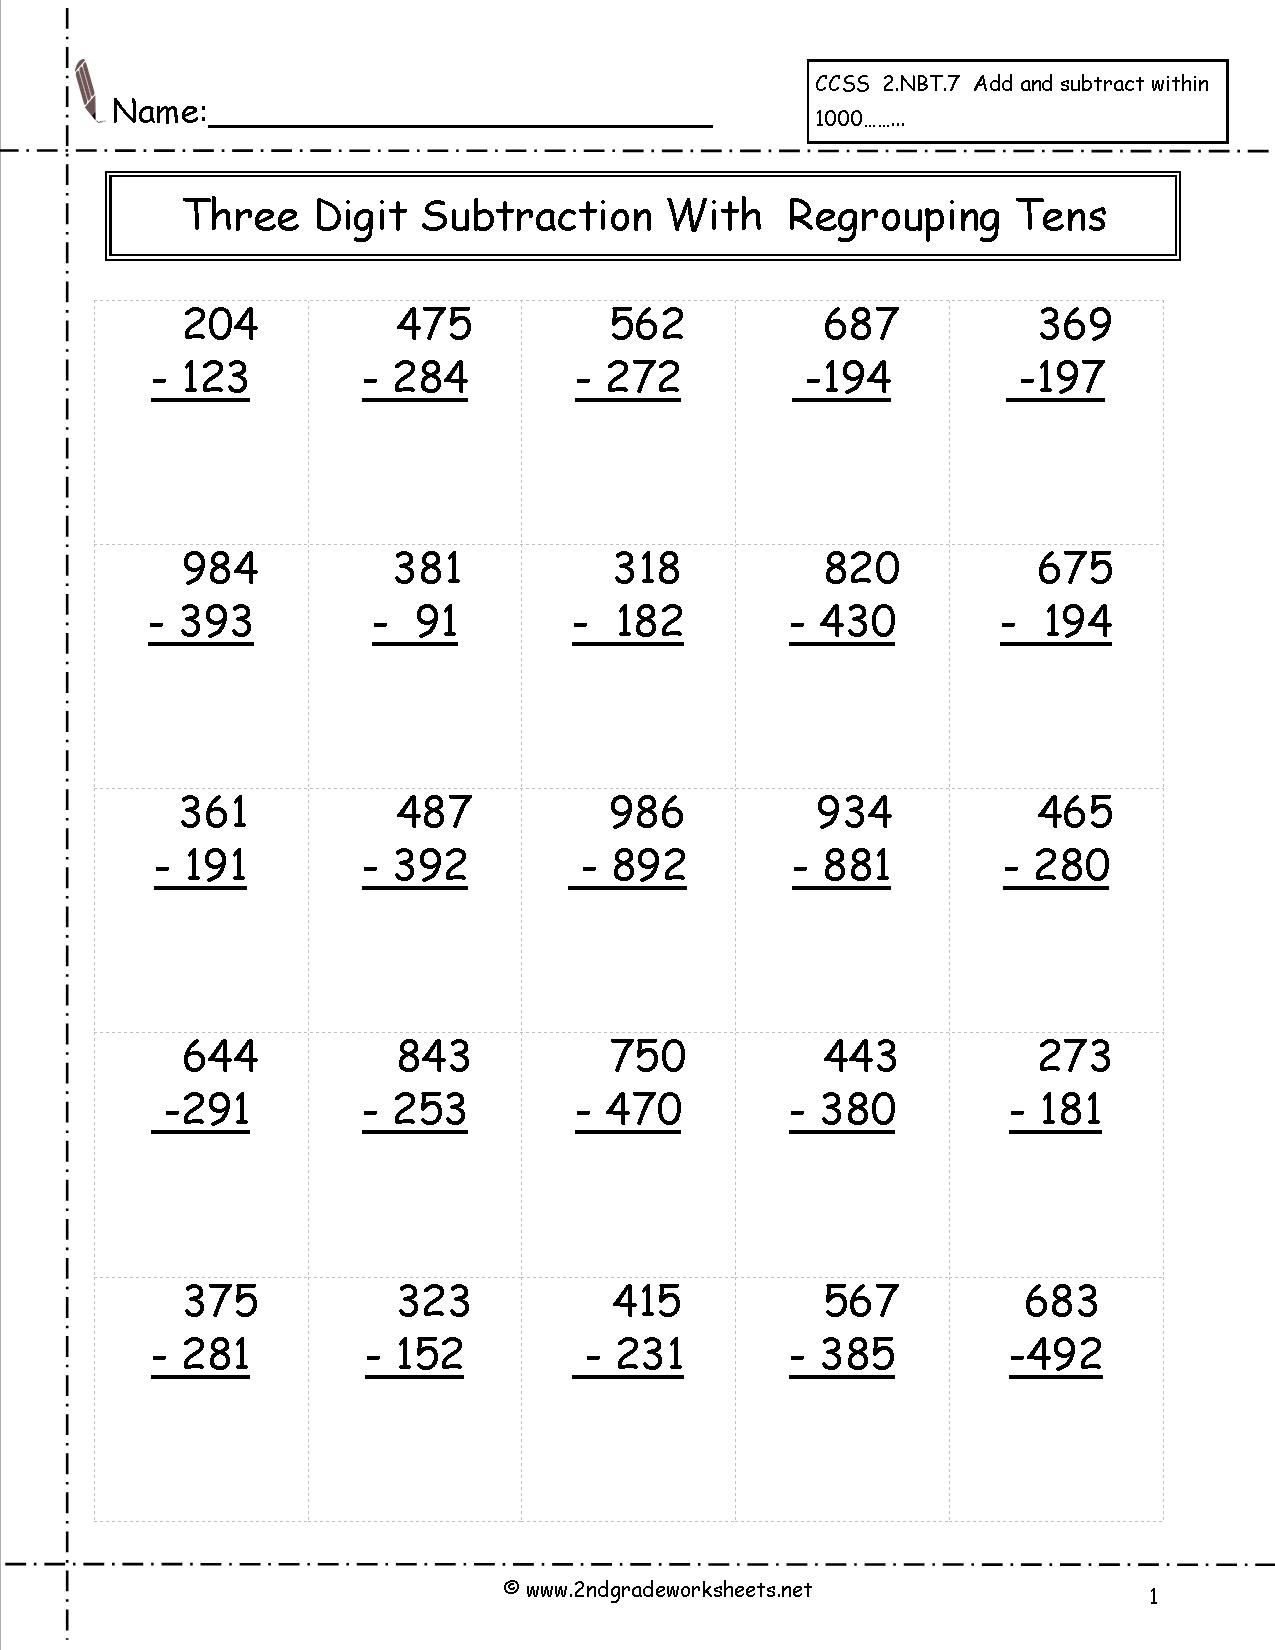 Three Digit Subtraction With Regrouping Worksheet | Learning - Free Printable 3 Digit Subtraction With Regrouping Worksheets